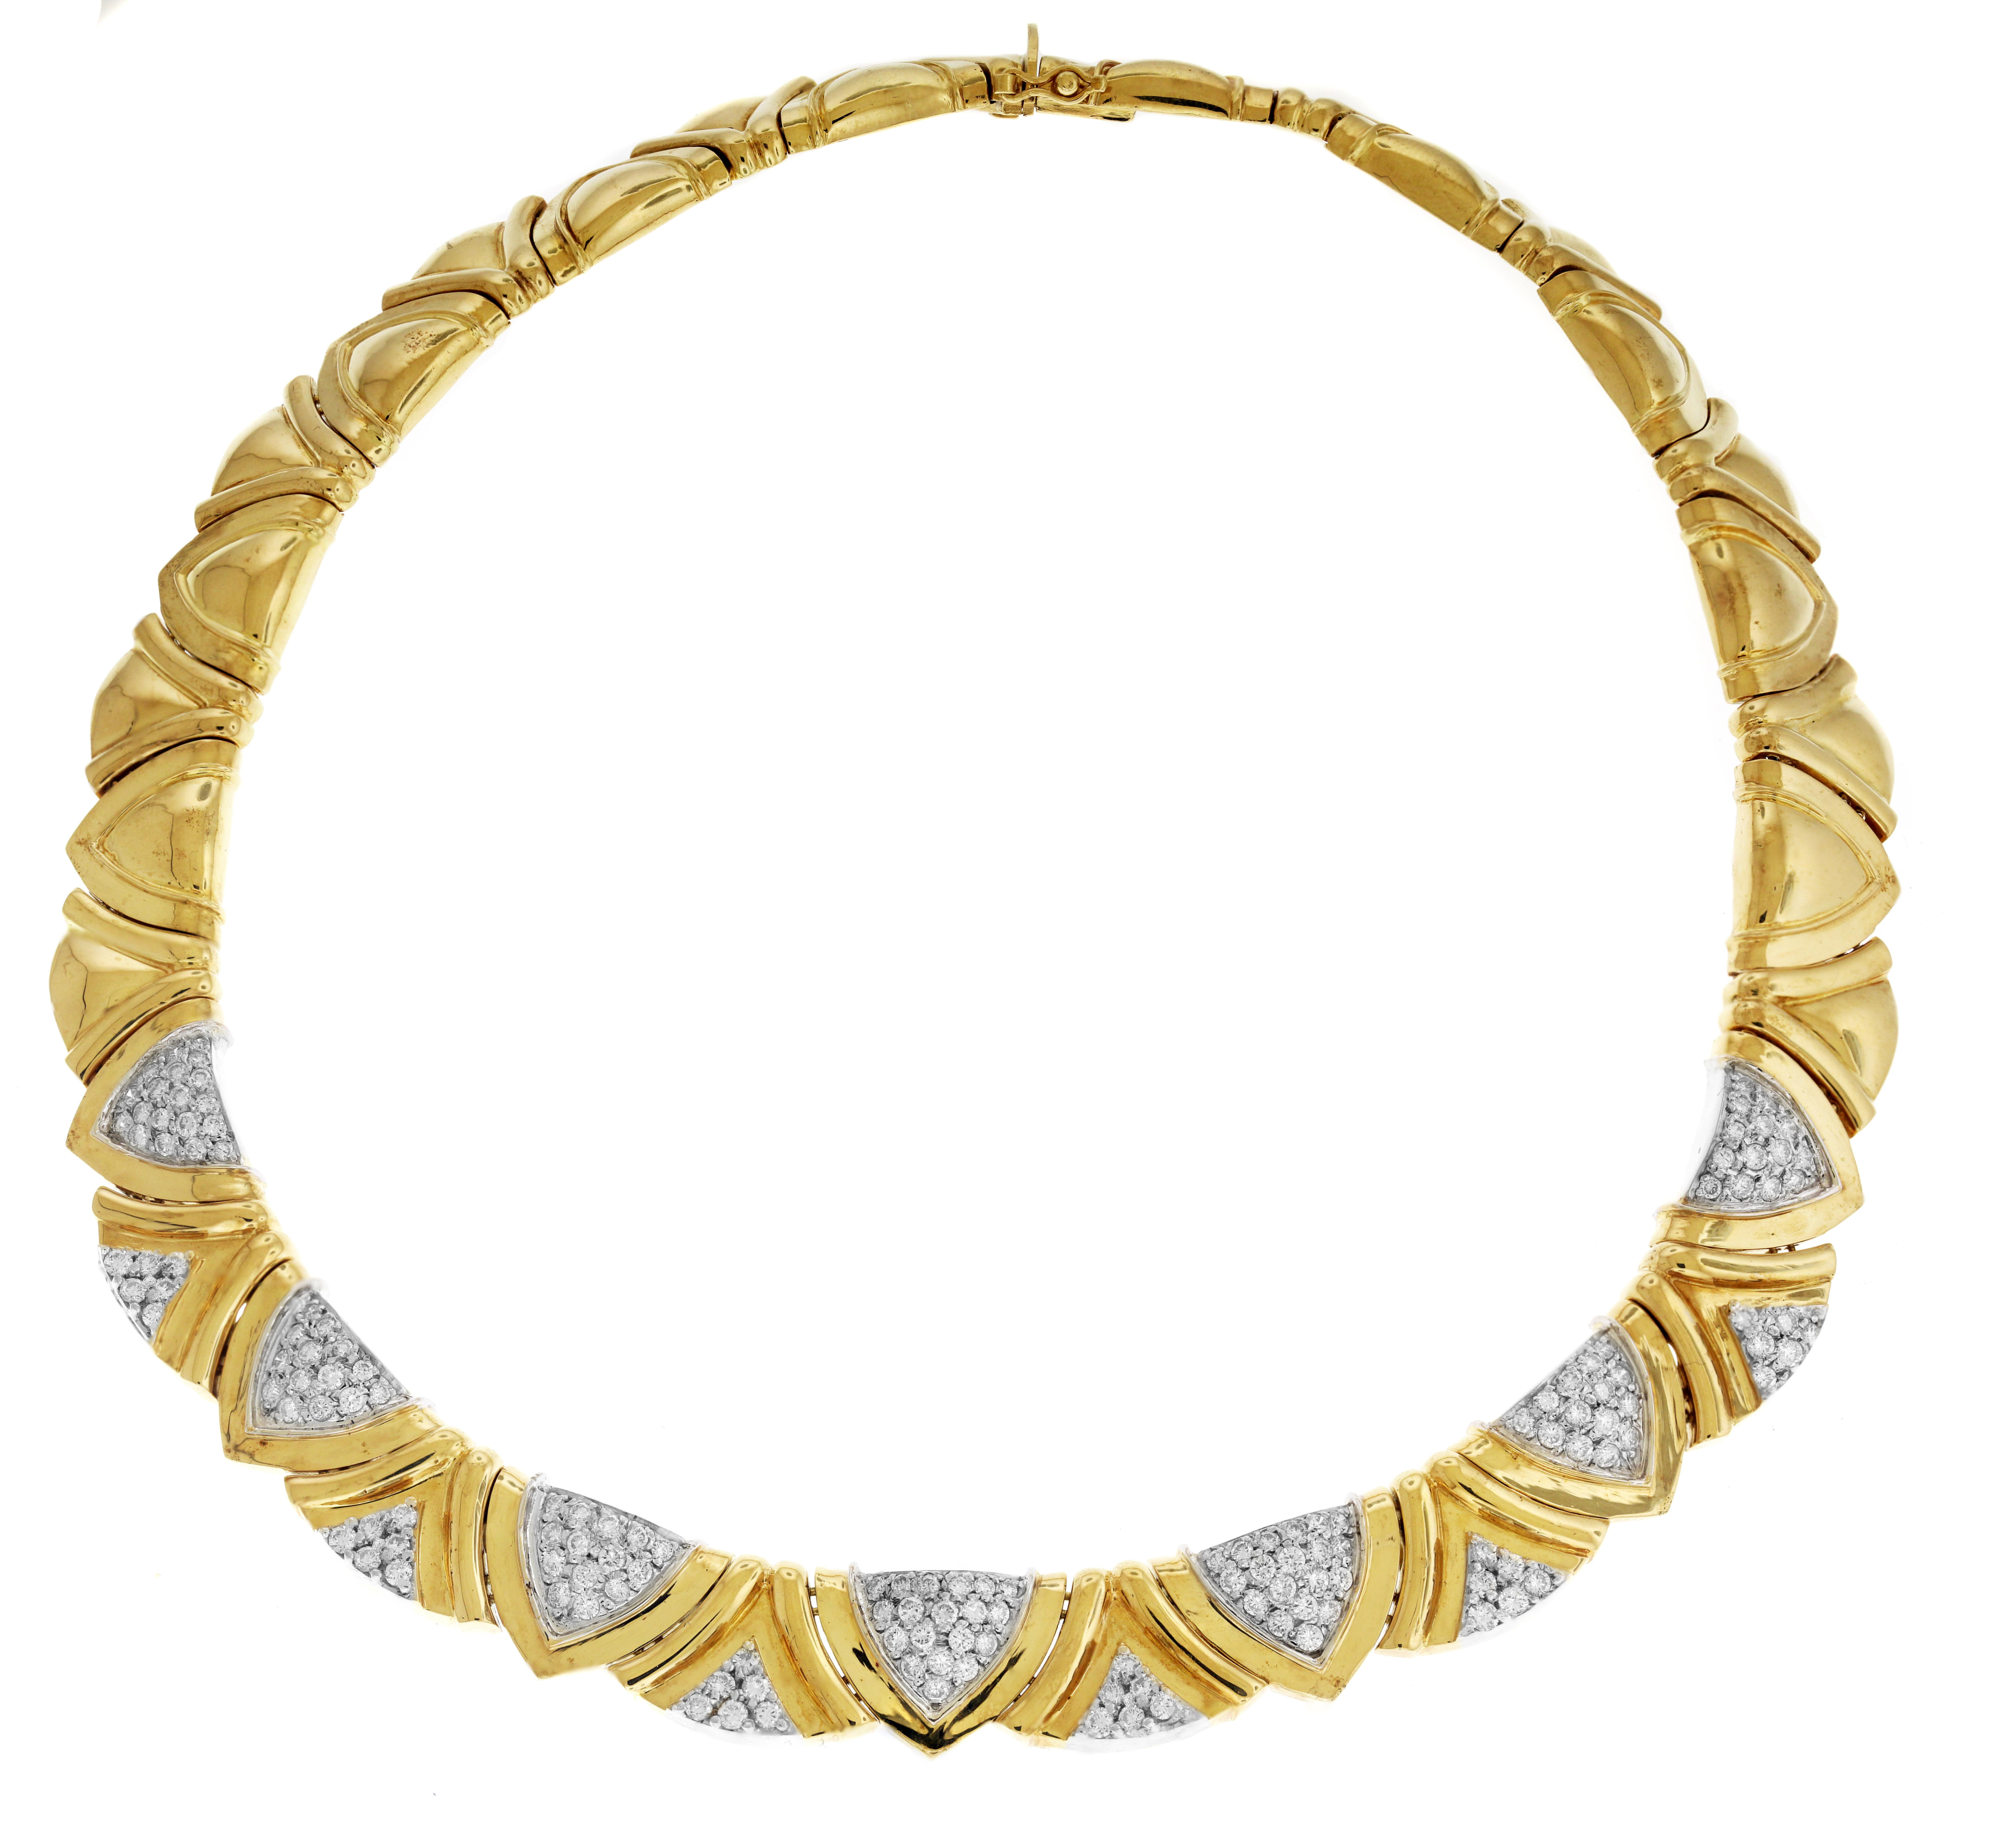 18K Yellow Gold and Diamond Necklace, Earring and Bracelet set by Simayof

Necklace is 16 inches in length. 0.5 inch width.
Bracelet is 7 inches length. 0.5 inch width
Earrings are 0.8 inch x 0.5 width with post friction backs

Necklace and bracelet